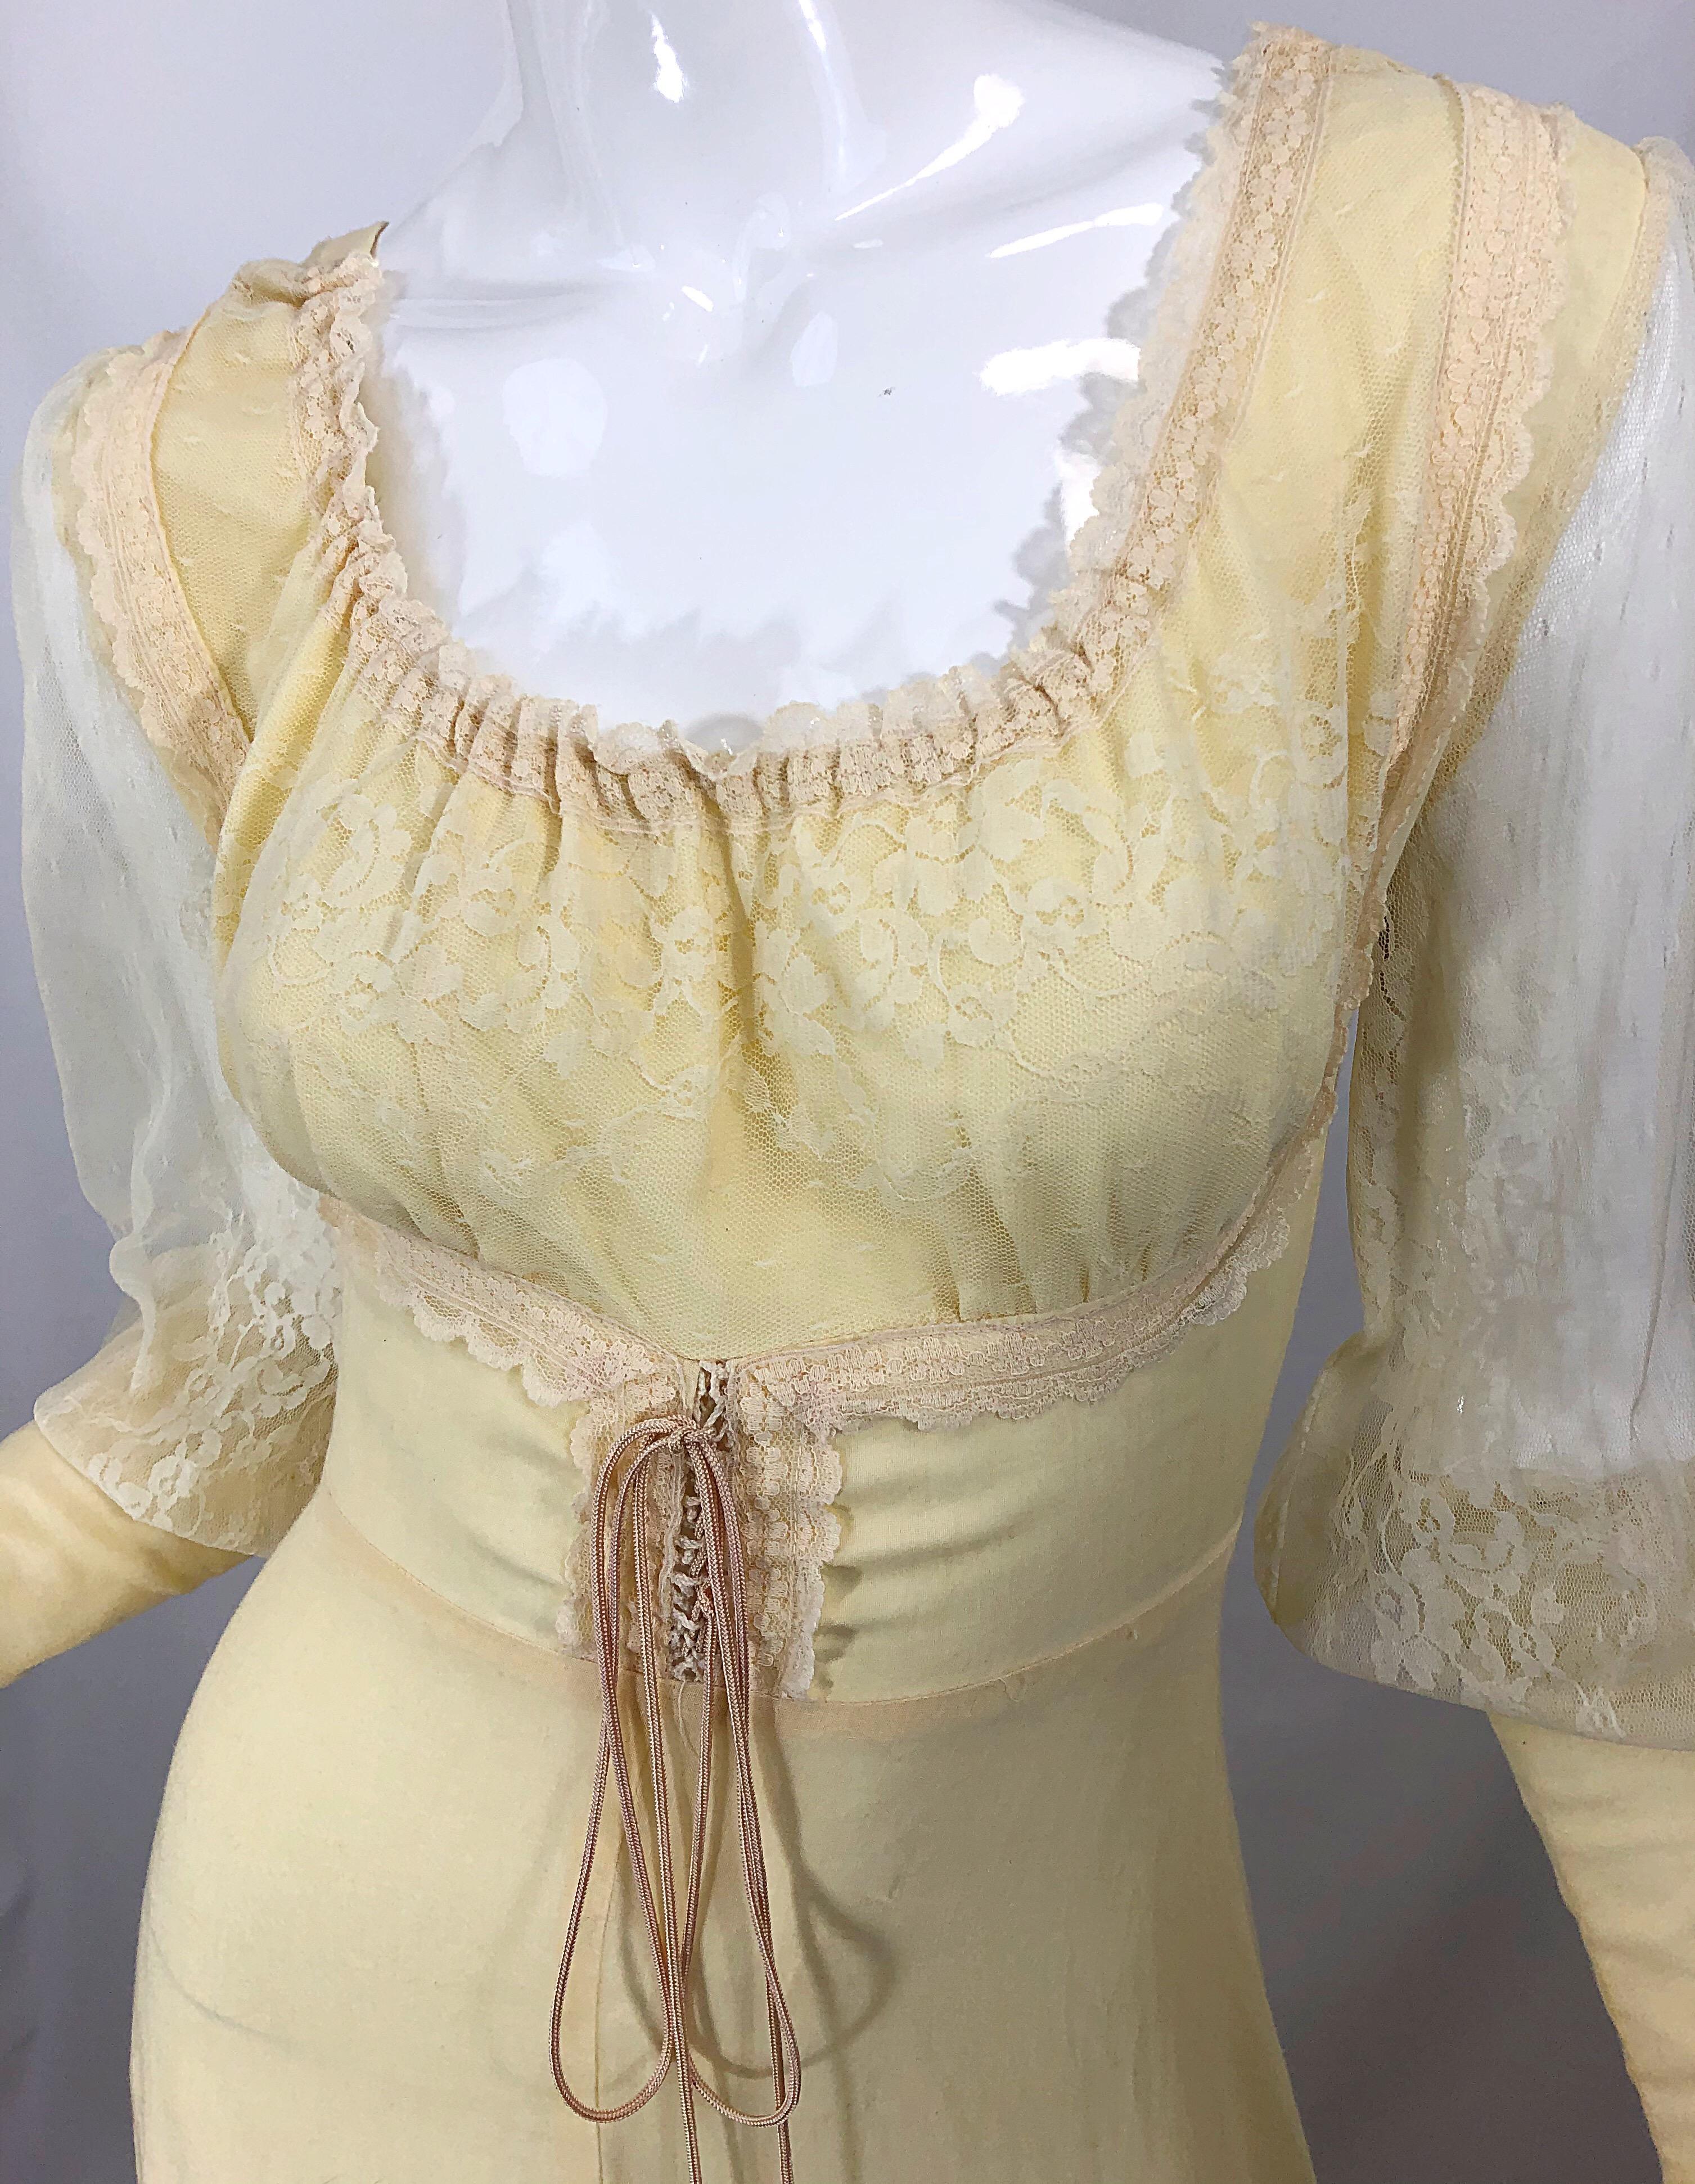 Women's 1970s Victorian Inspired Pale Yellow Cotton Voile + Lace Peasant 70s Maxi Dress For Sale